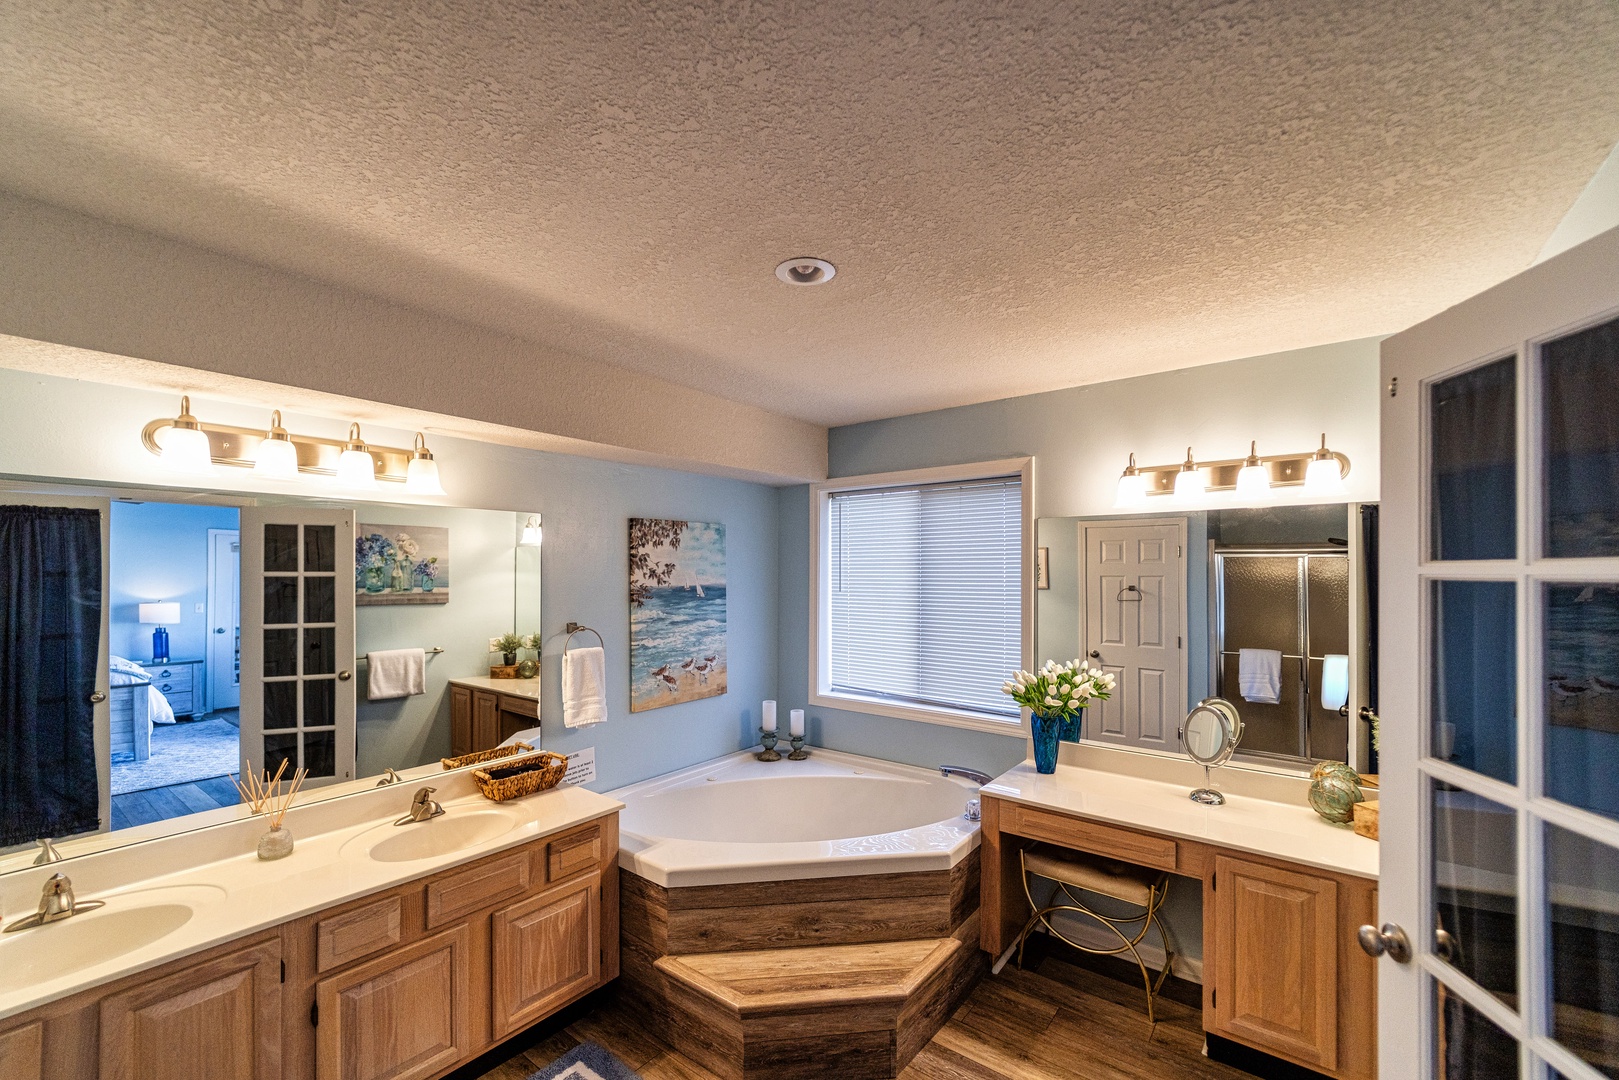 Bathroom private en-suite with soaking tub, dual sinks, vanity, and stand up shower